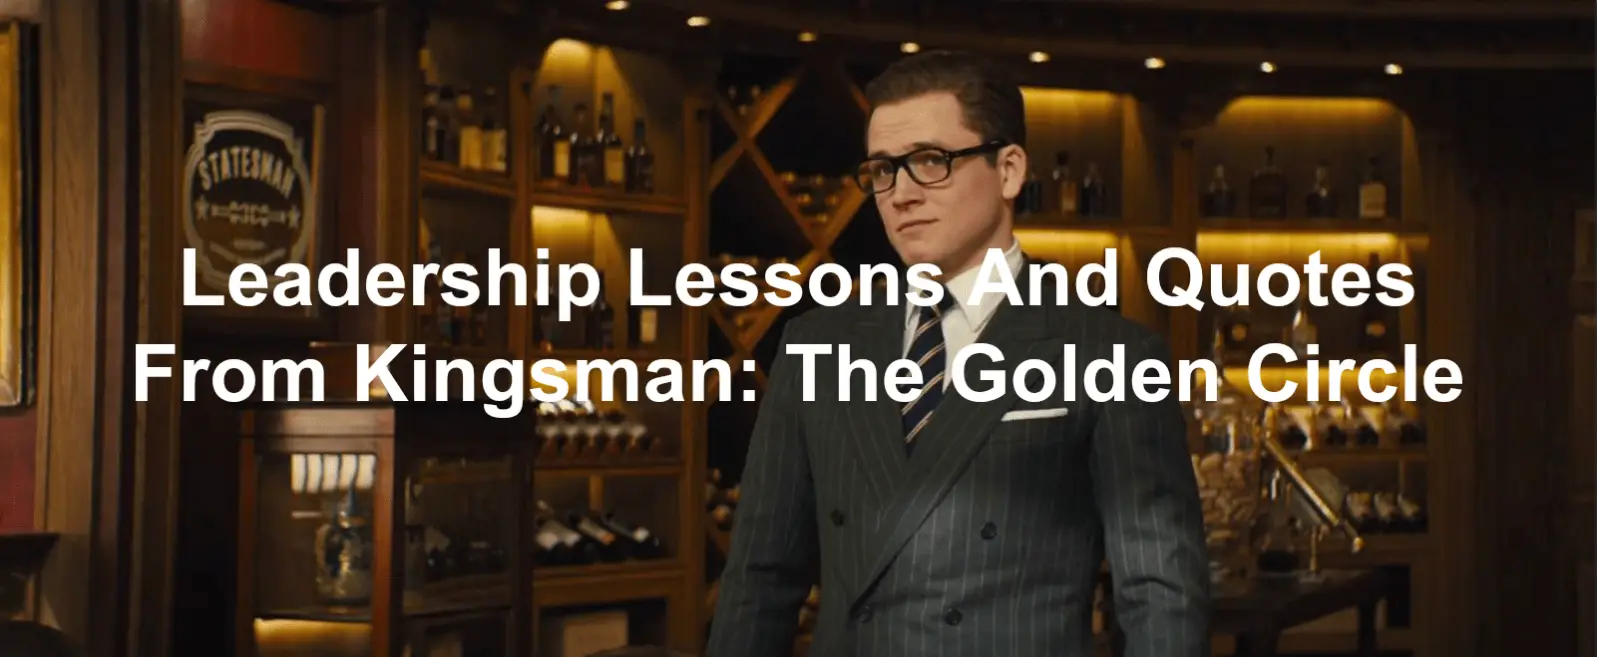 leadership lessons and quotes from Kingsman: The Golden Circle